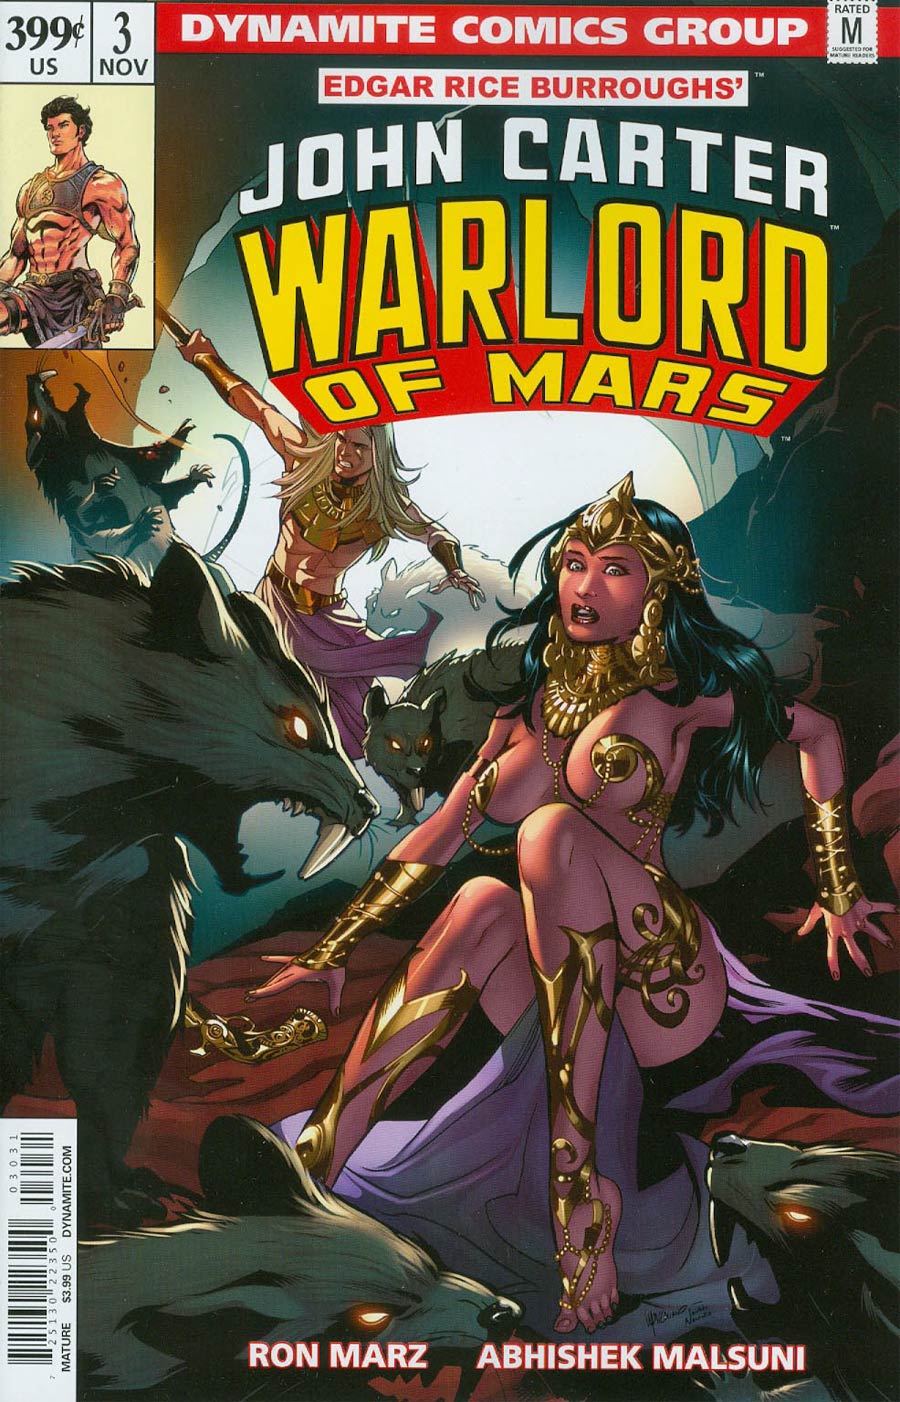 John Carter Warlord Of Mars Vol 2 #3 Cover C Variant Emanuela Lupacchino Cover